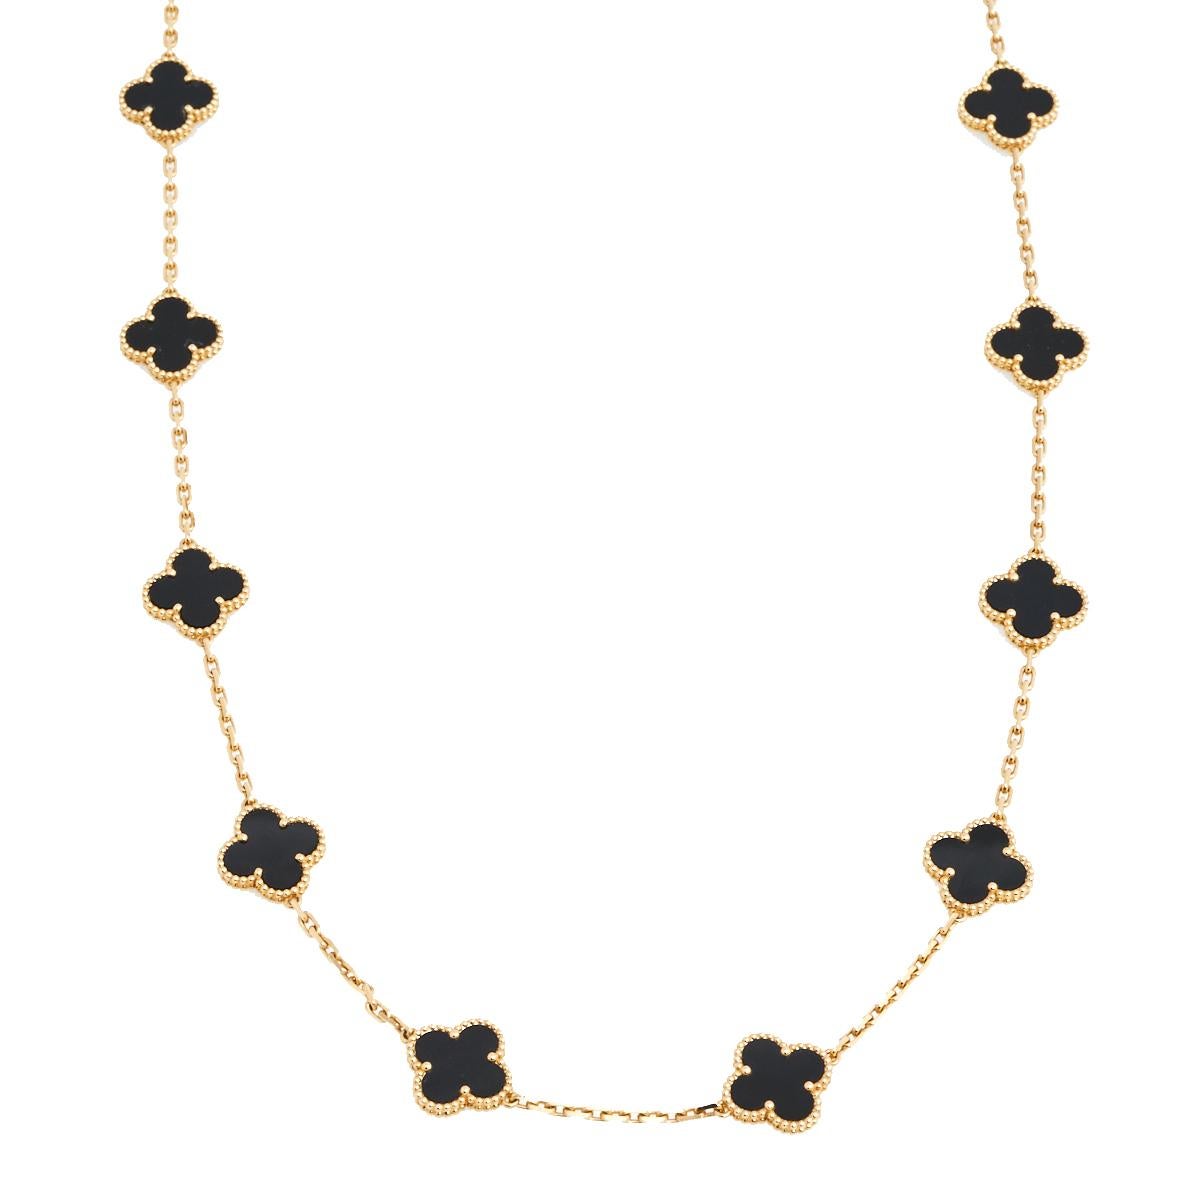 This long station necklace heralds Van Cleef & Arpels' power to create magical pieces of jewelry. The creation is from the Vintage Alhambra line and it arrives in a harmonious gathering of 20 Alhambra motifs, each set with onyx. The necklace is made